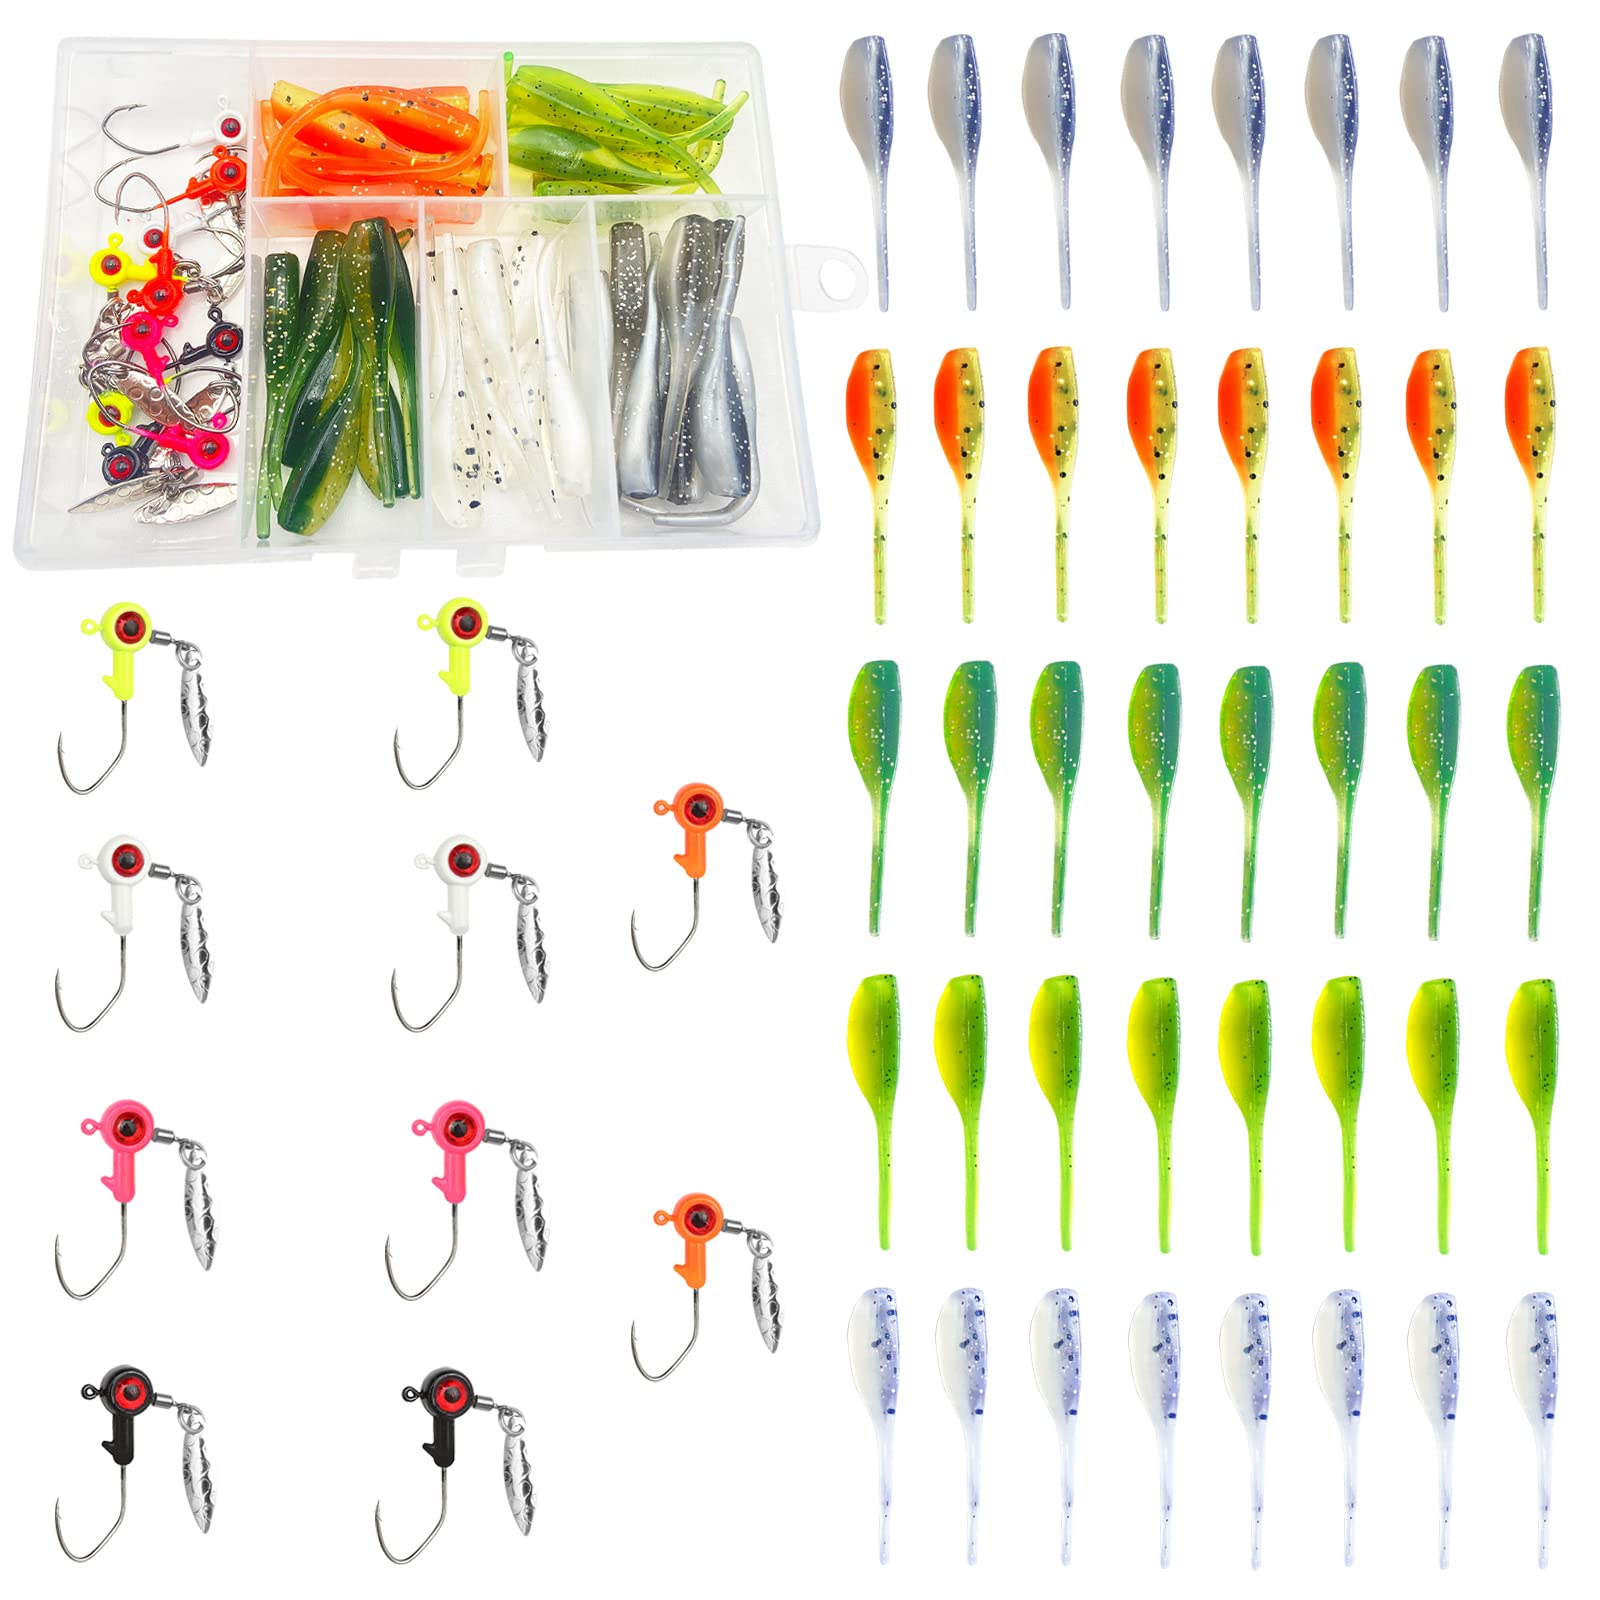 50Pcs Crappie Jigs Lure Set 2 inch Crappie Bait Crappie Jig Heads Hooks Fishing  Lures for Crappie (A:10pcs 1/16 oz jigs and 40pcs Lures) : :  Sports, Fitness & Outdoors